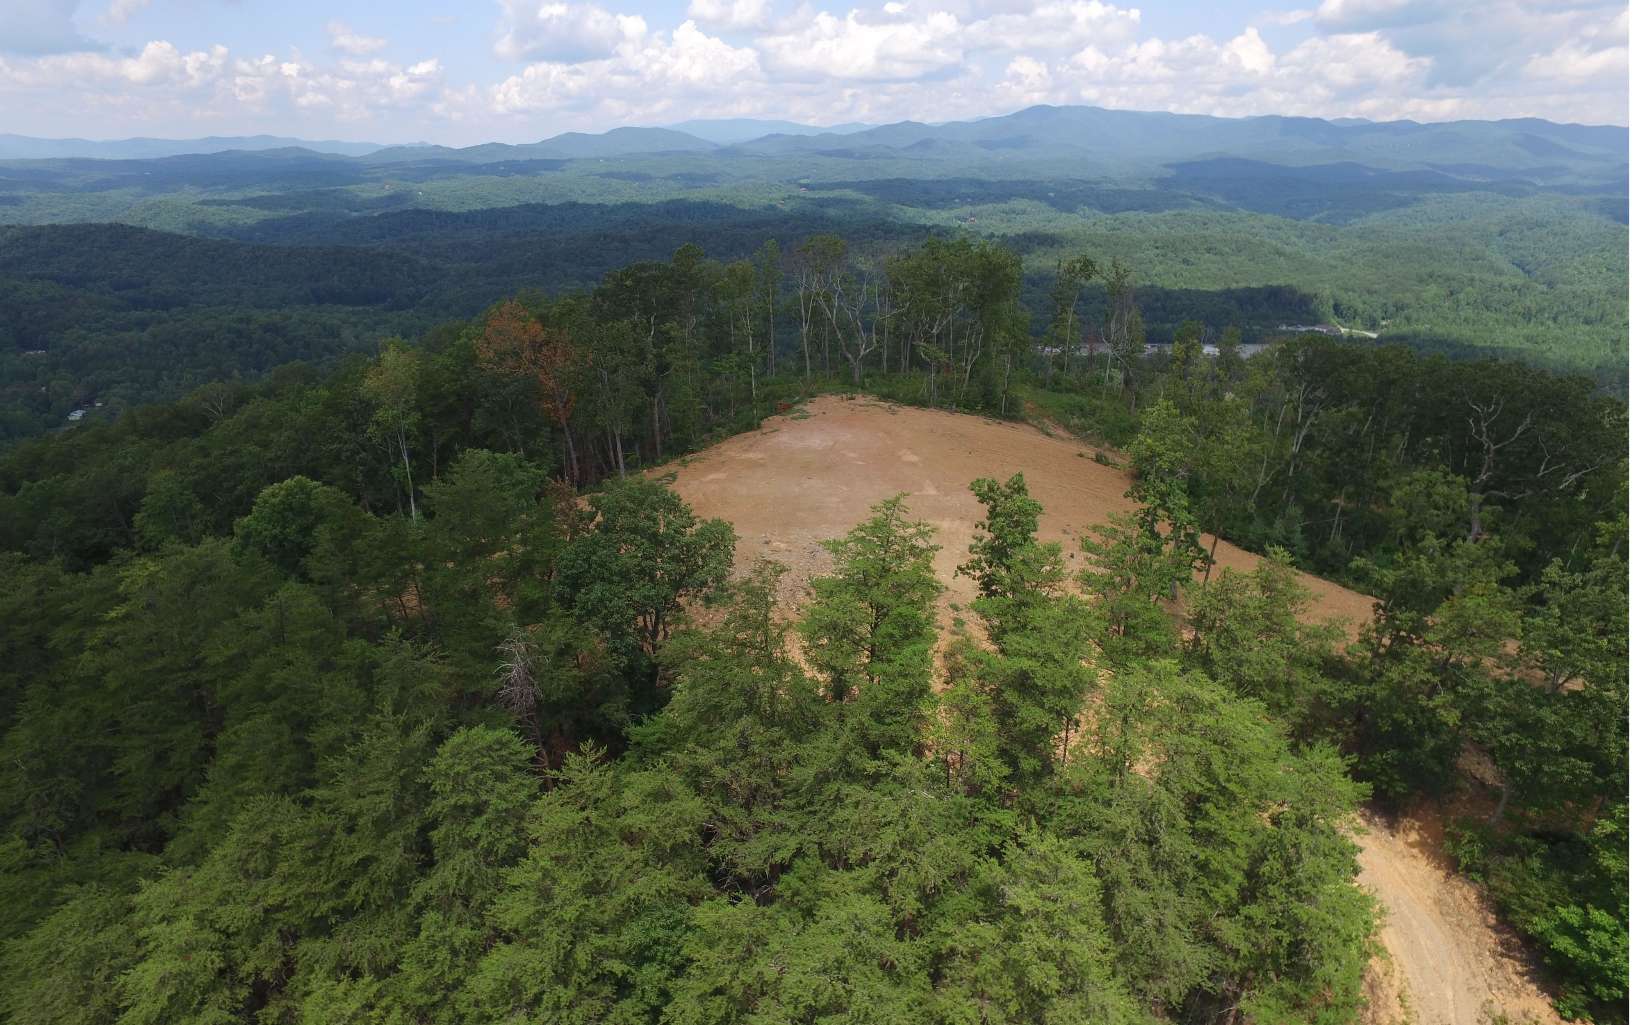 360 Degree Mountain Views from Mountain top! Long Range Mountain VIEWS! Road System roughed in with home sites in place Easy access from Highway 515 for Tax ID Parcel # 3094-009 consisting of 135 +/- Acres. Tax ID # 3094A-007 consisting of 6.9 +/- Acres & 3094A-008 consisting of 5.3 +/- Acres from Cherry Log - Stonecrest Subdivision; Located between Ellijay and Blue Ridge!